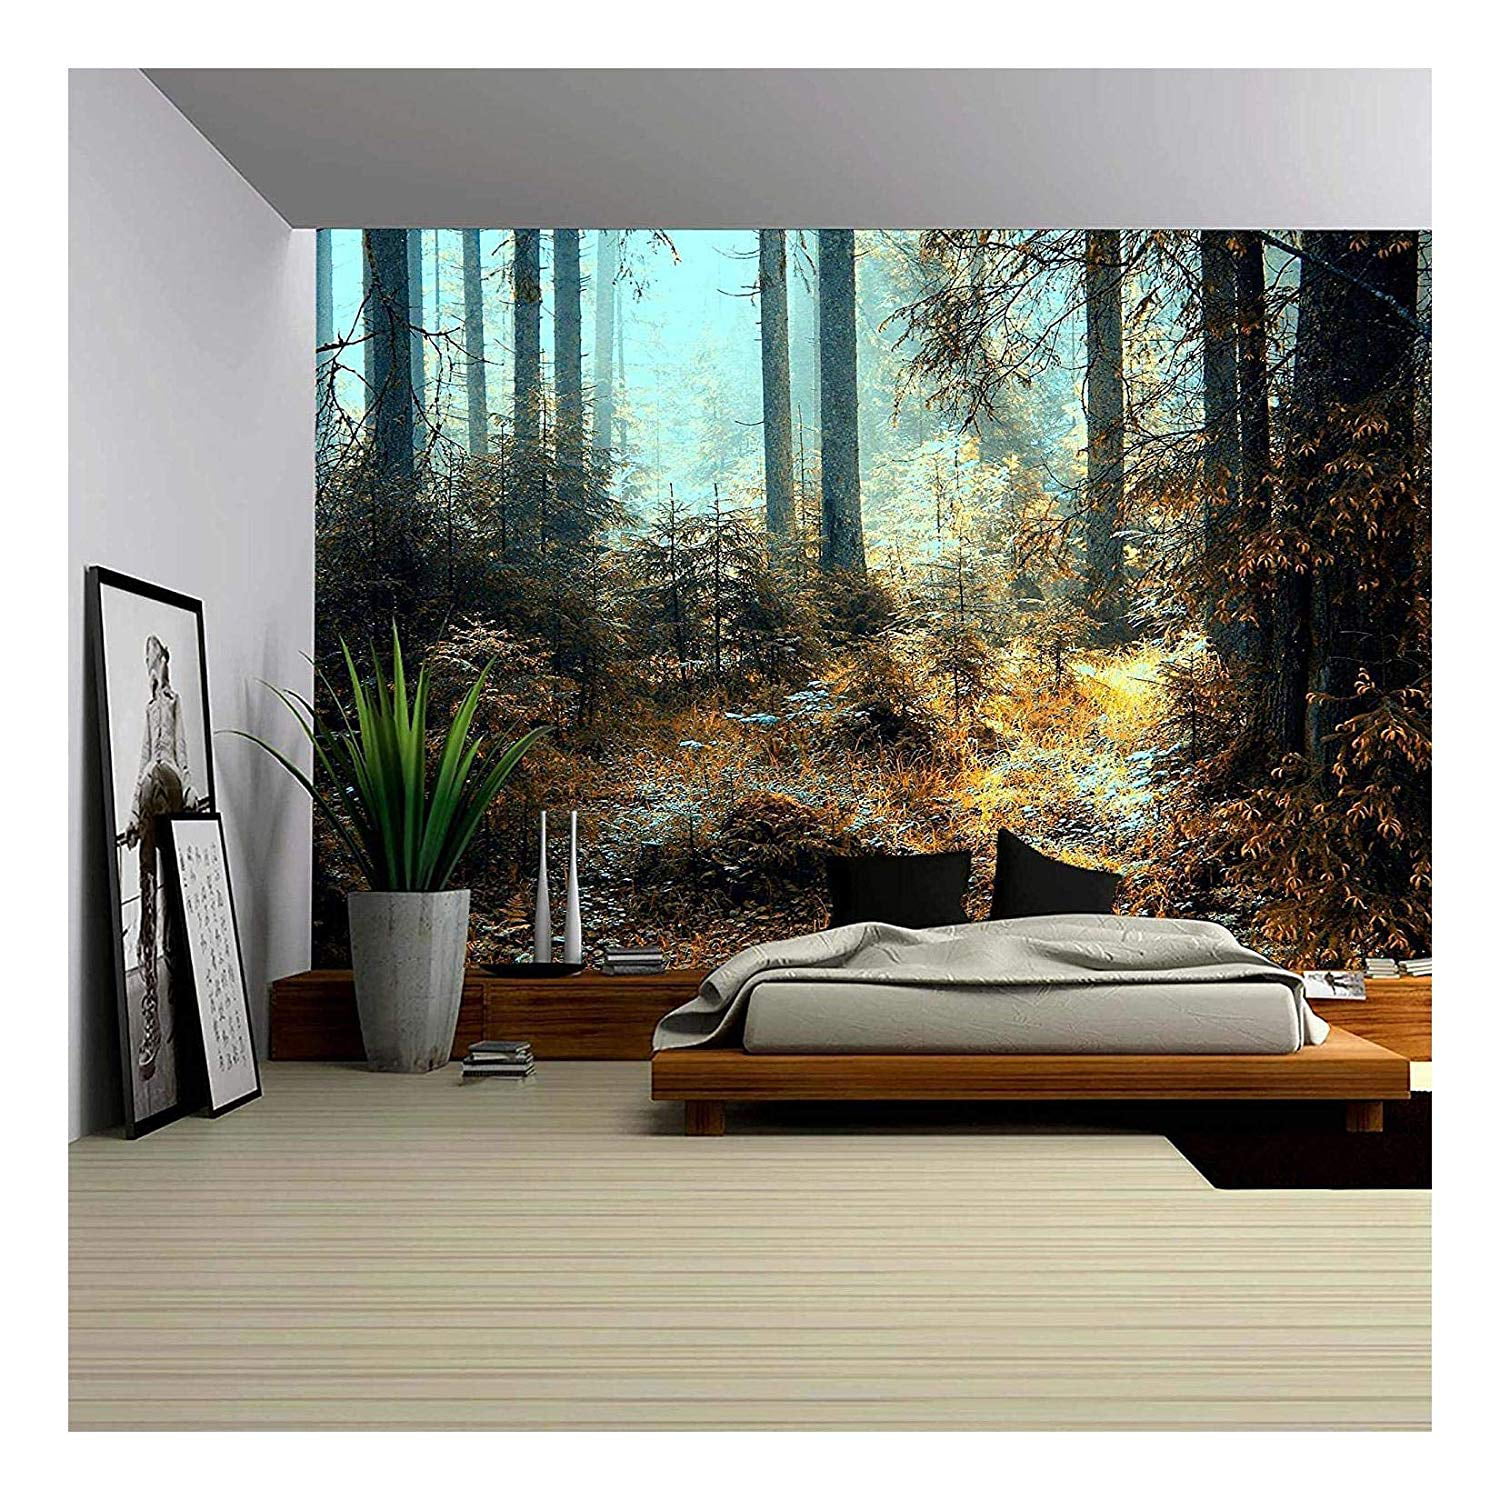 Landscape Wall Mural Lush Waterfall and flowers Removable Sticker- 66x96 